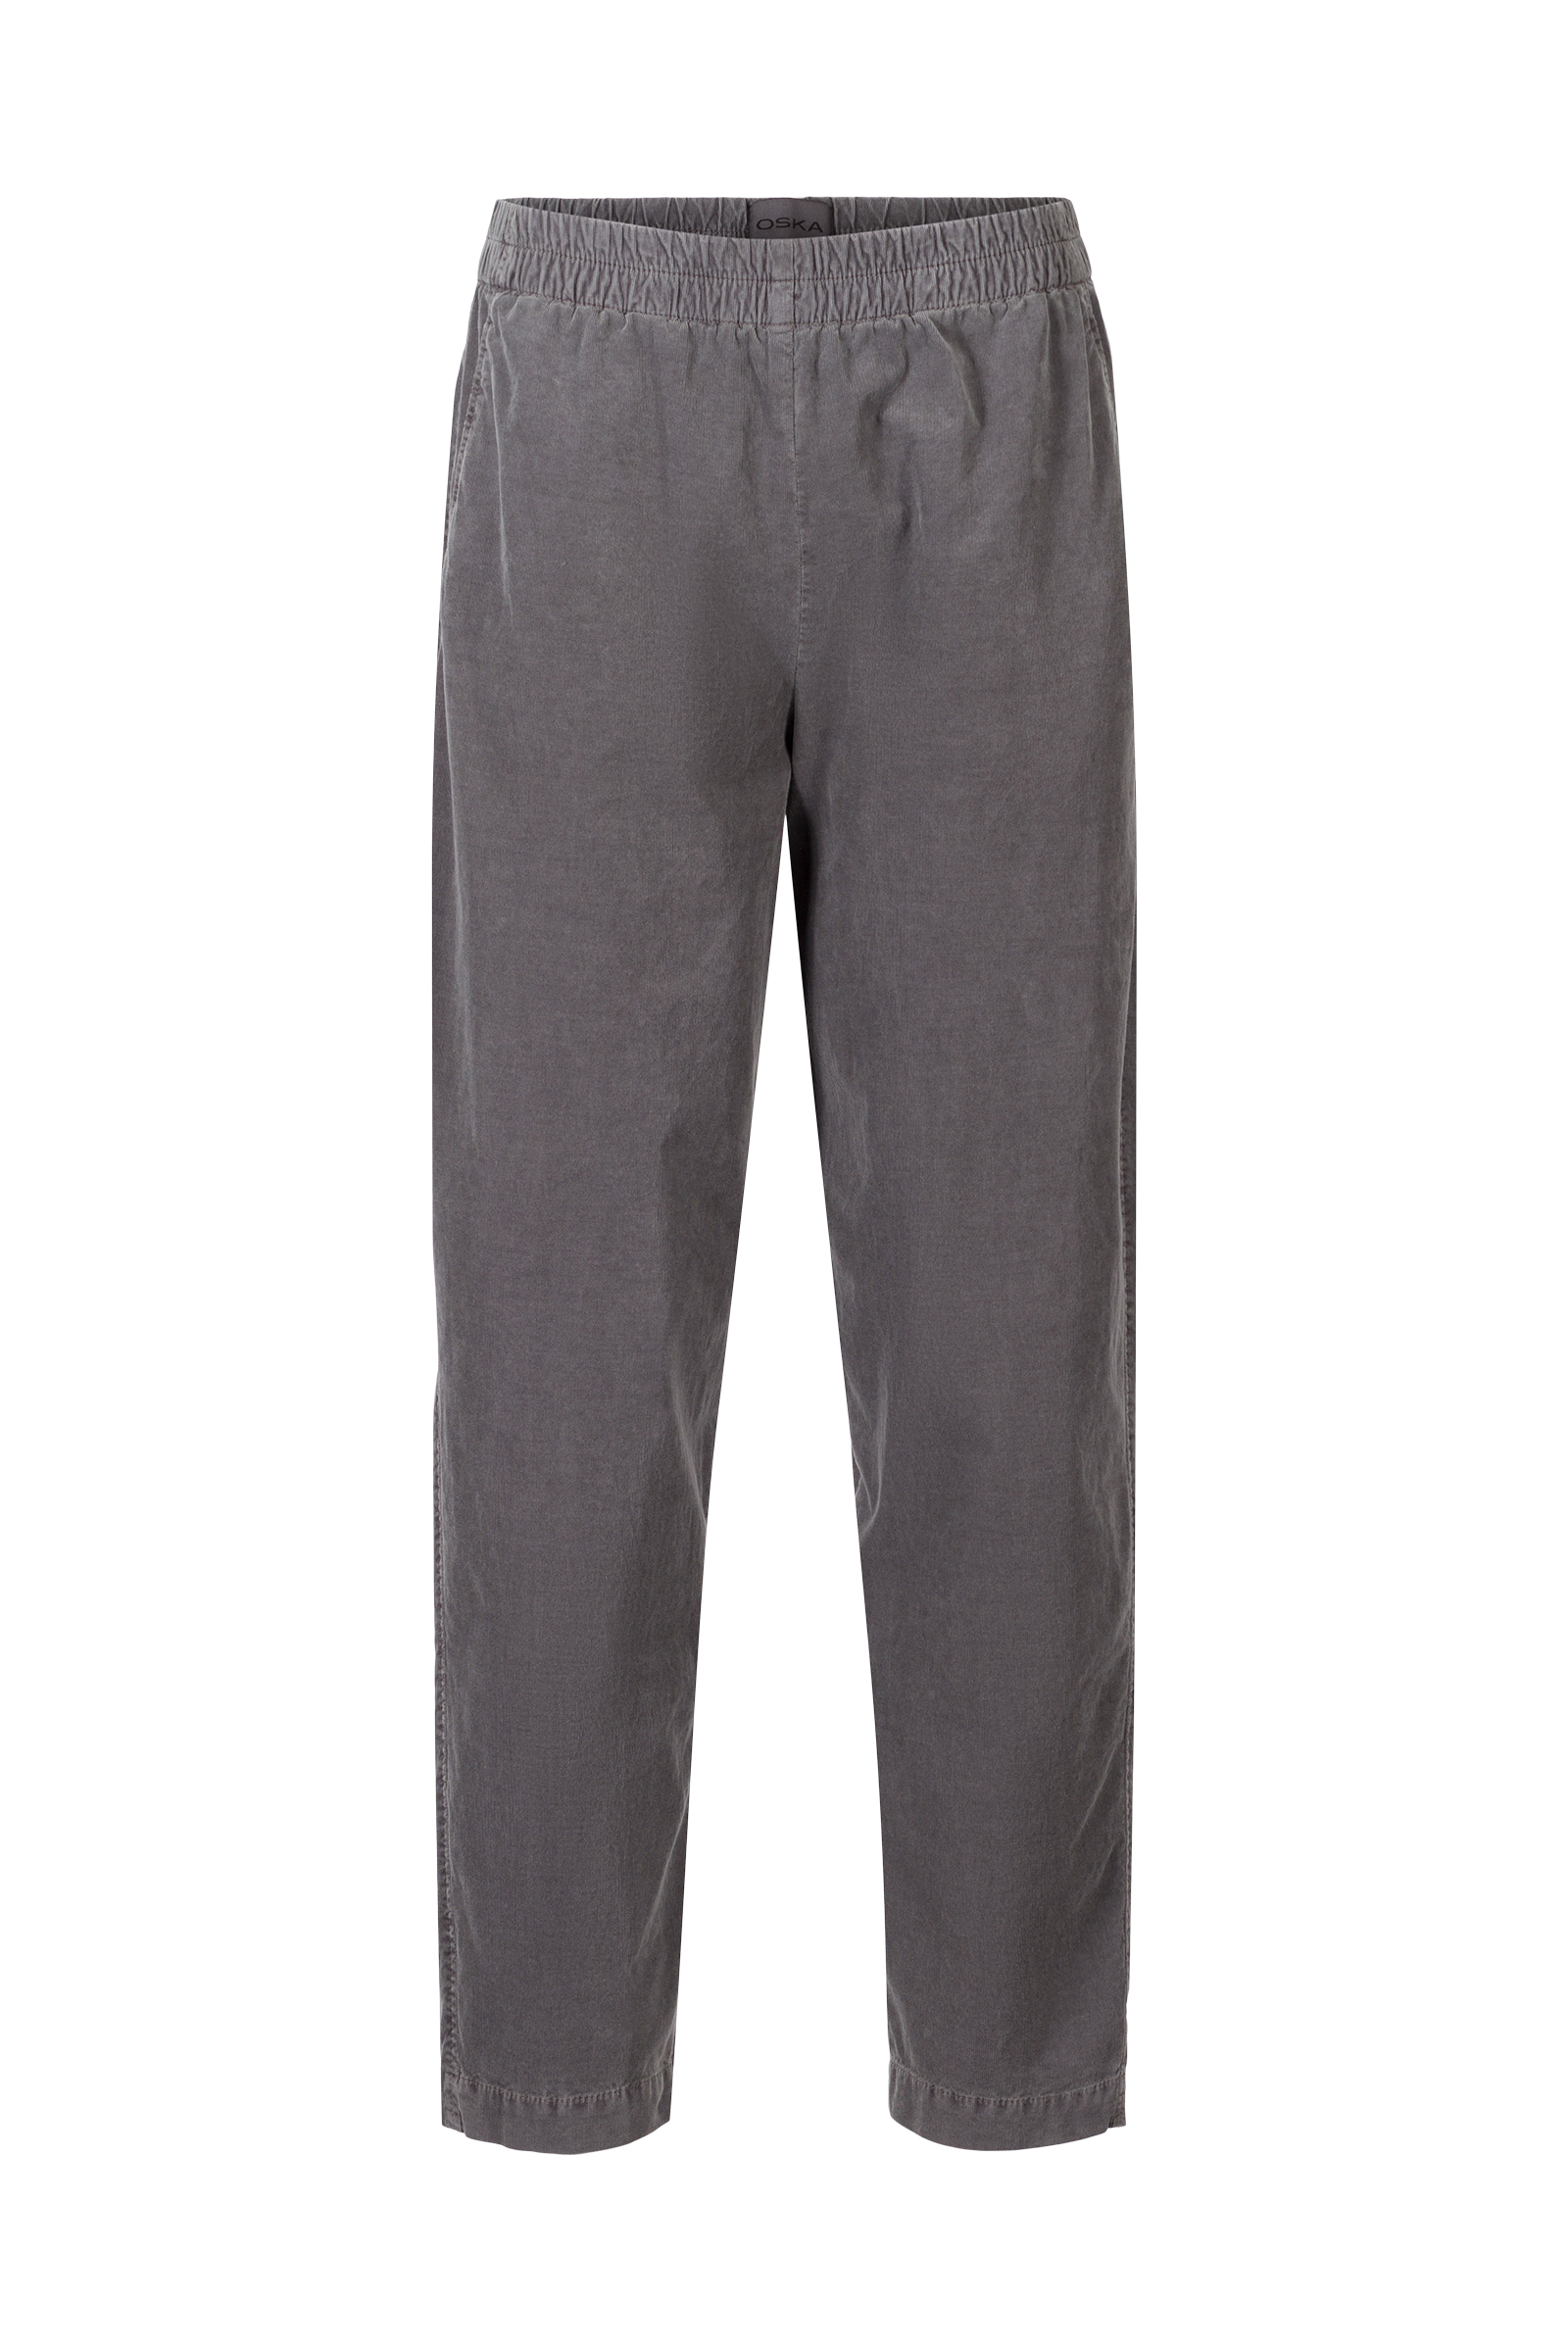 OSKA - Trousers Minnima 310 / Cotton cord with stretch content